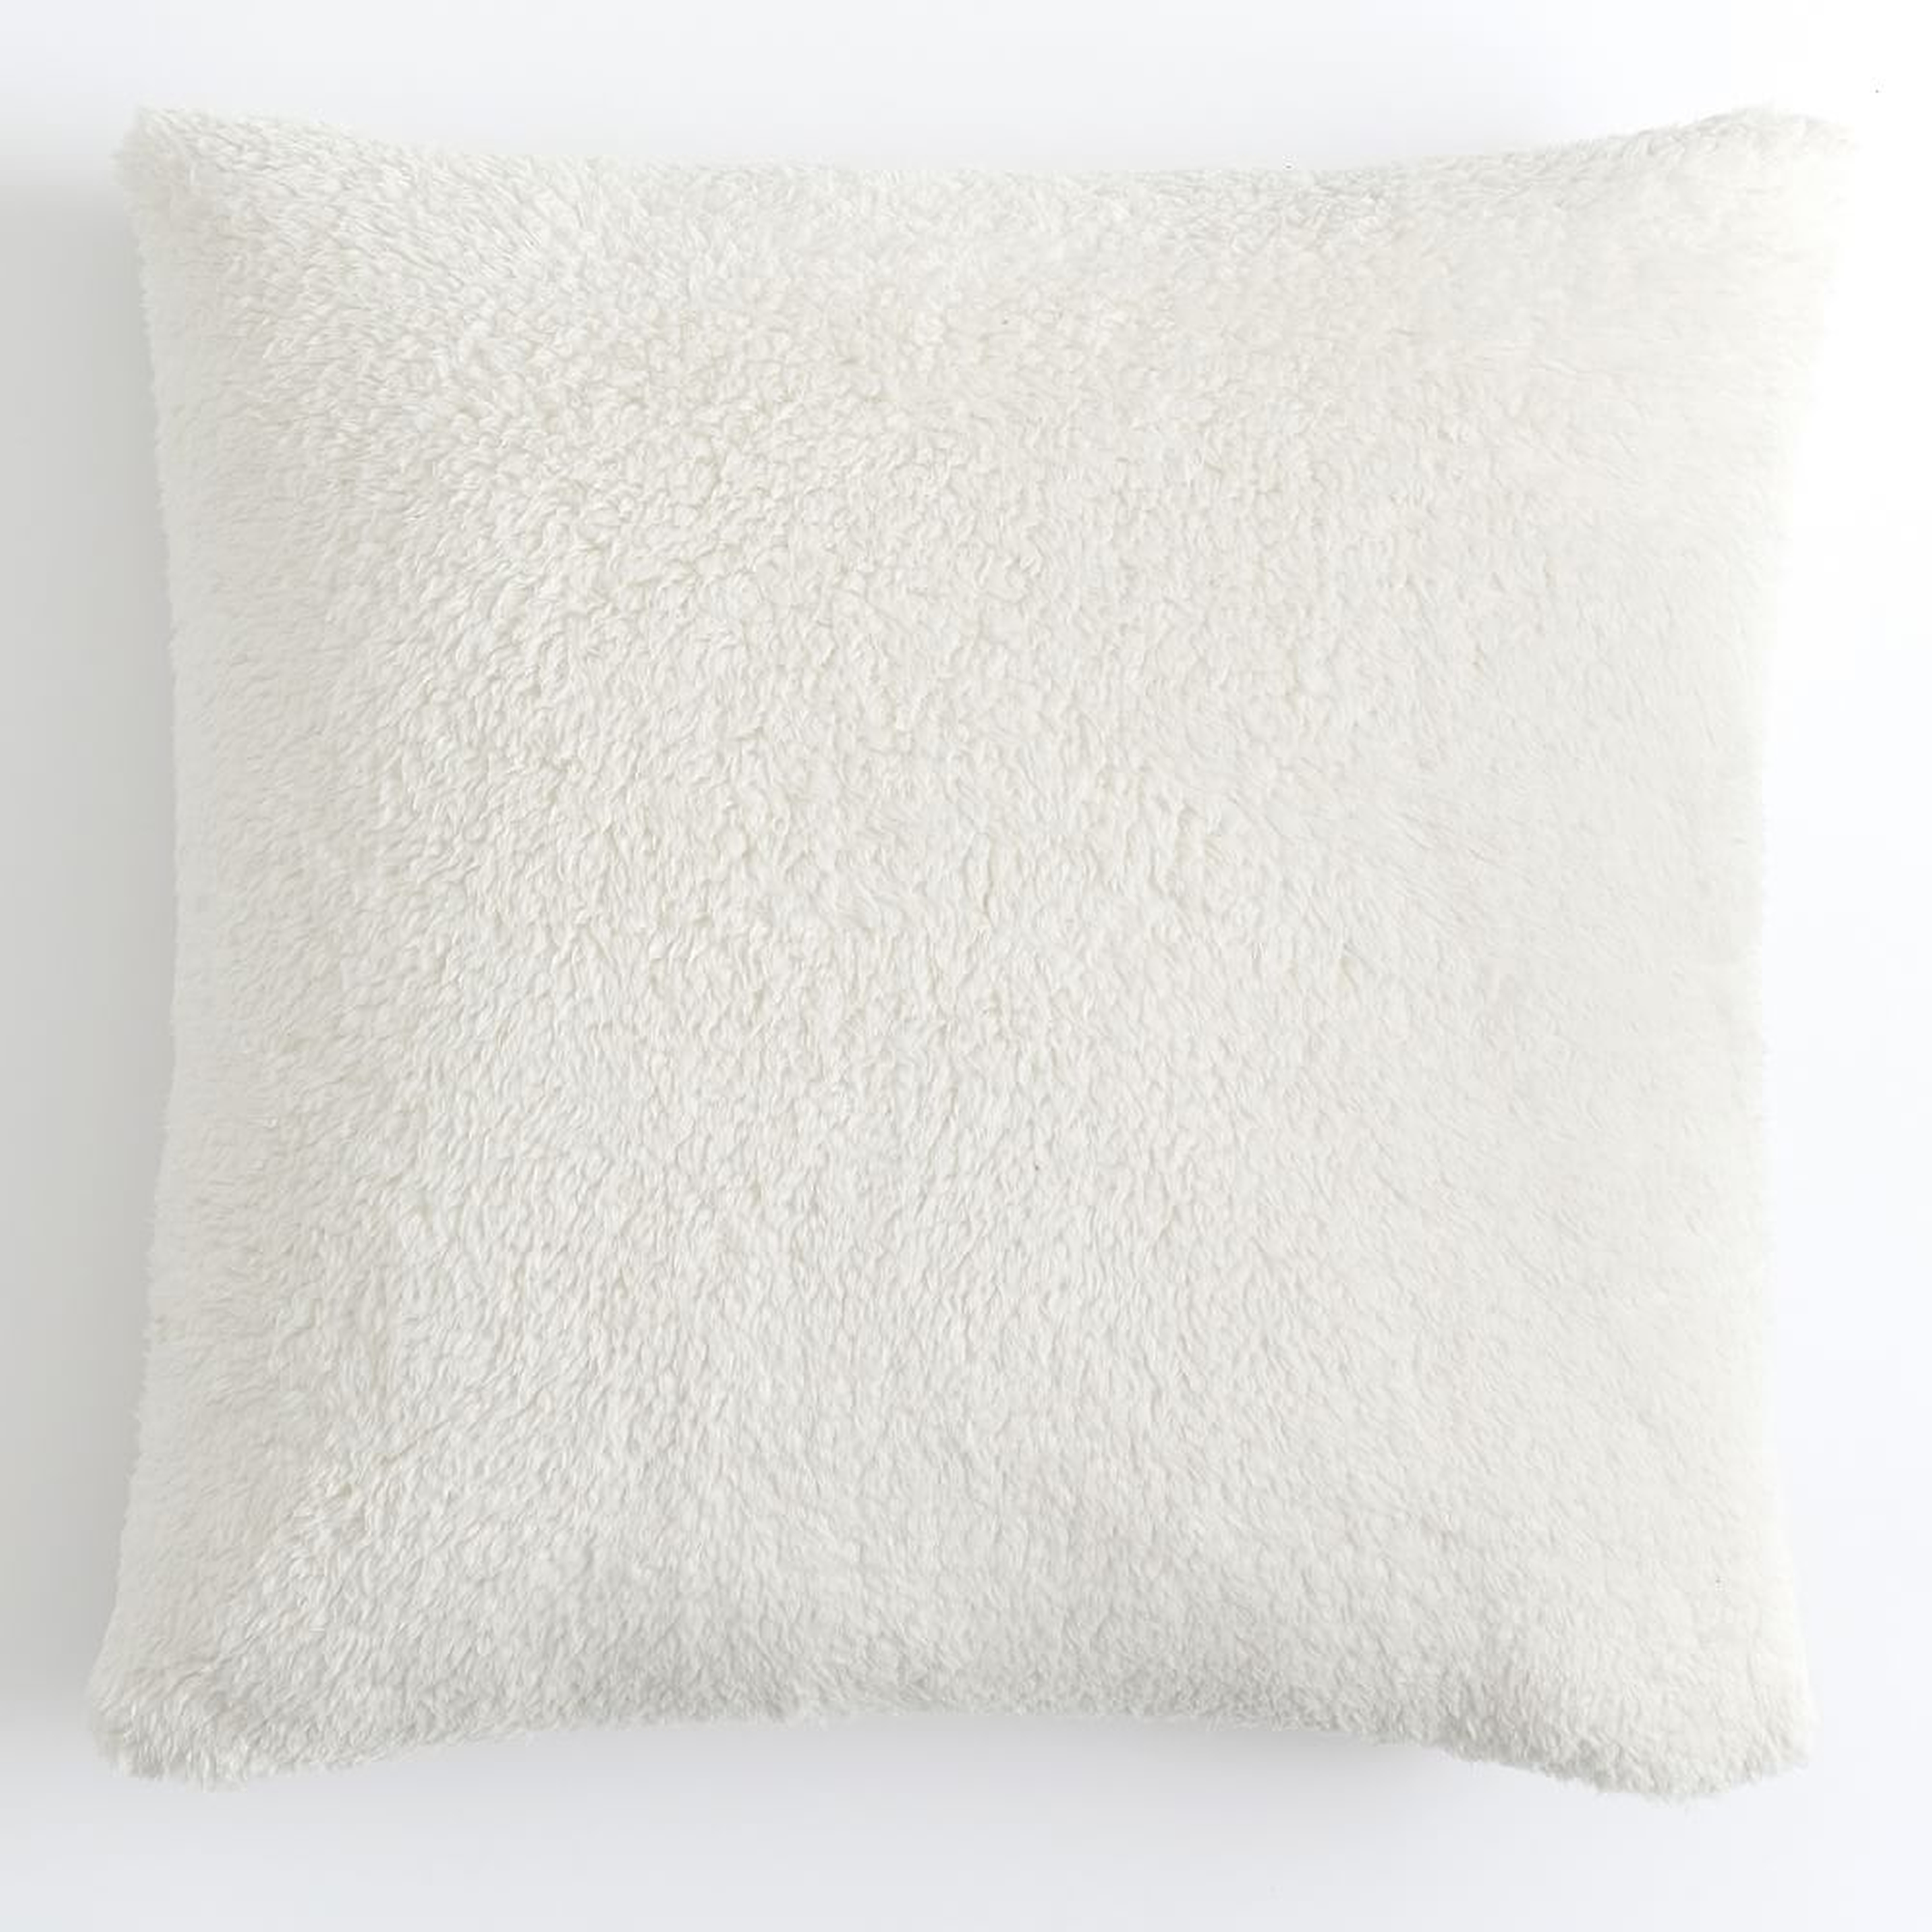 Cozy Euro Sherpa Pillow Cover, 26x26, Ivory - Pottery Barn Teen